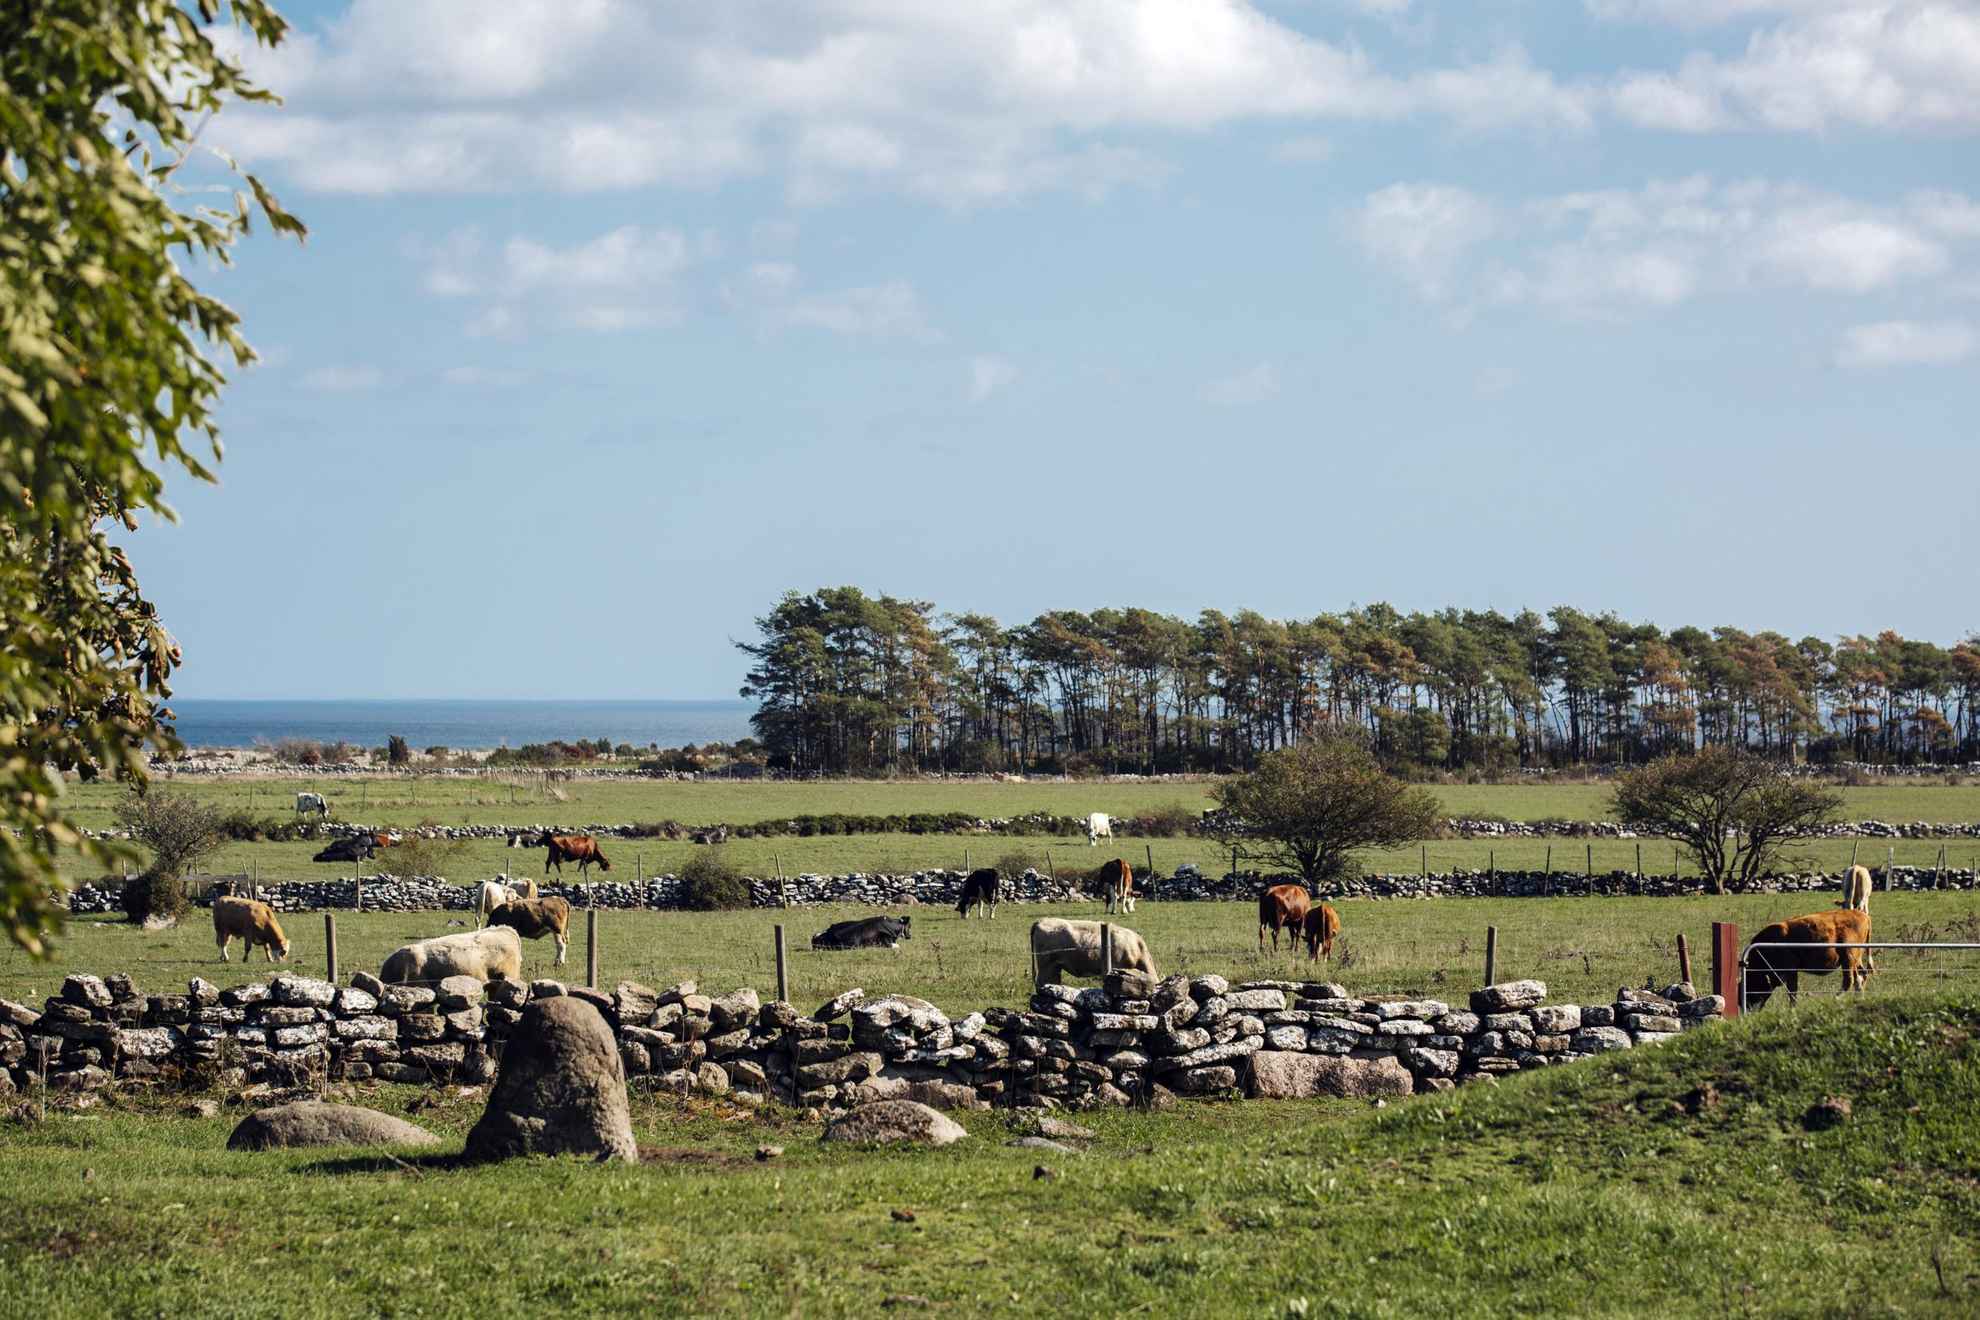 View of cow pastures with cows grazing on the island Öland. In the background you see the sea.